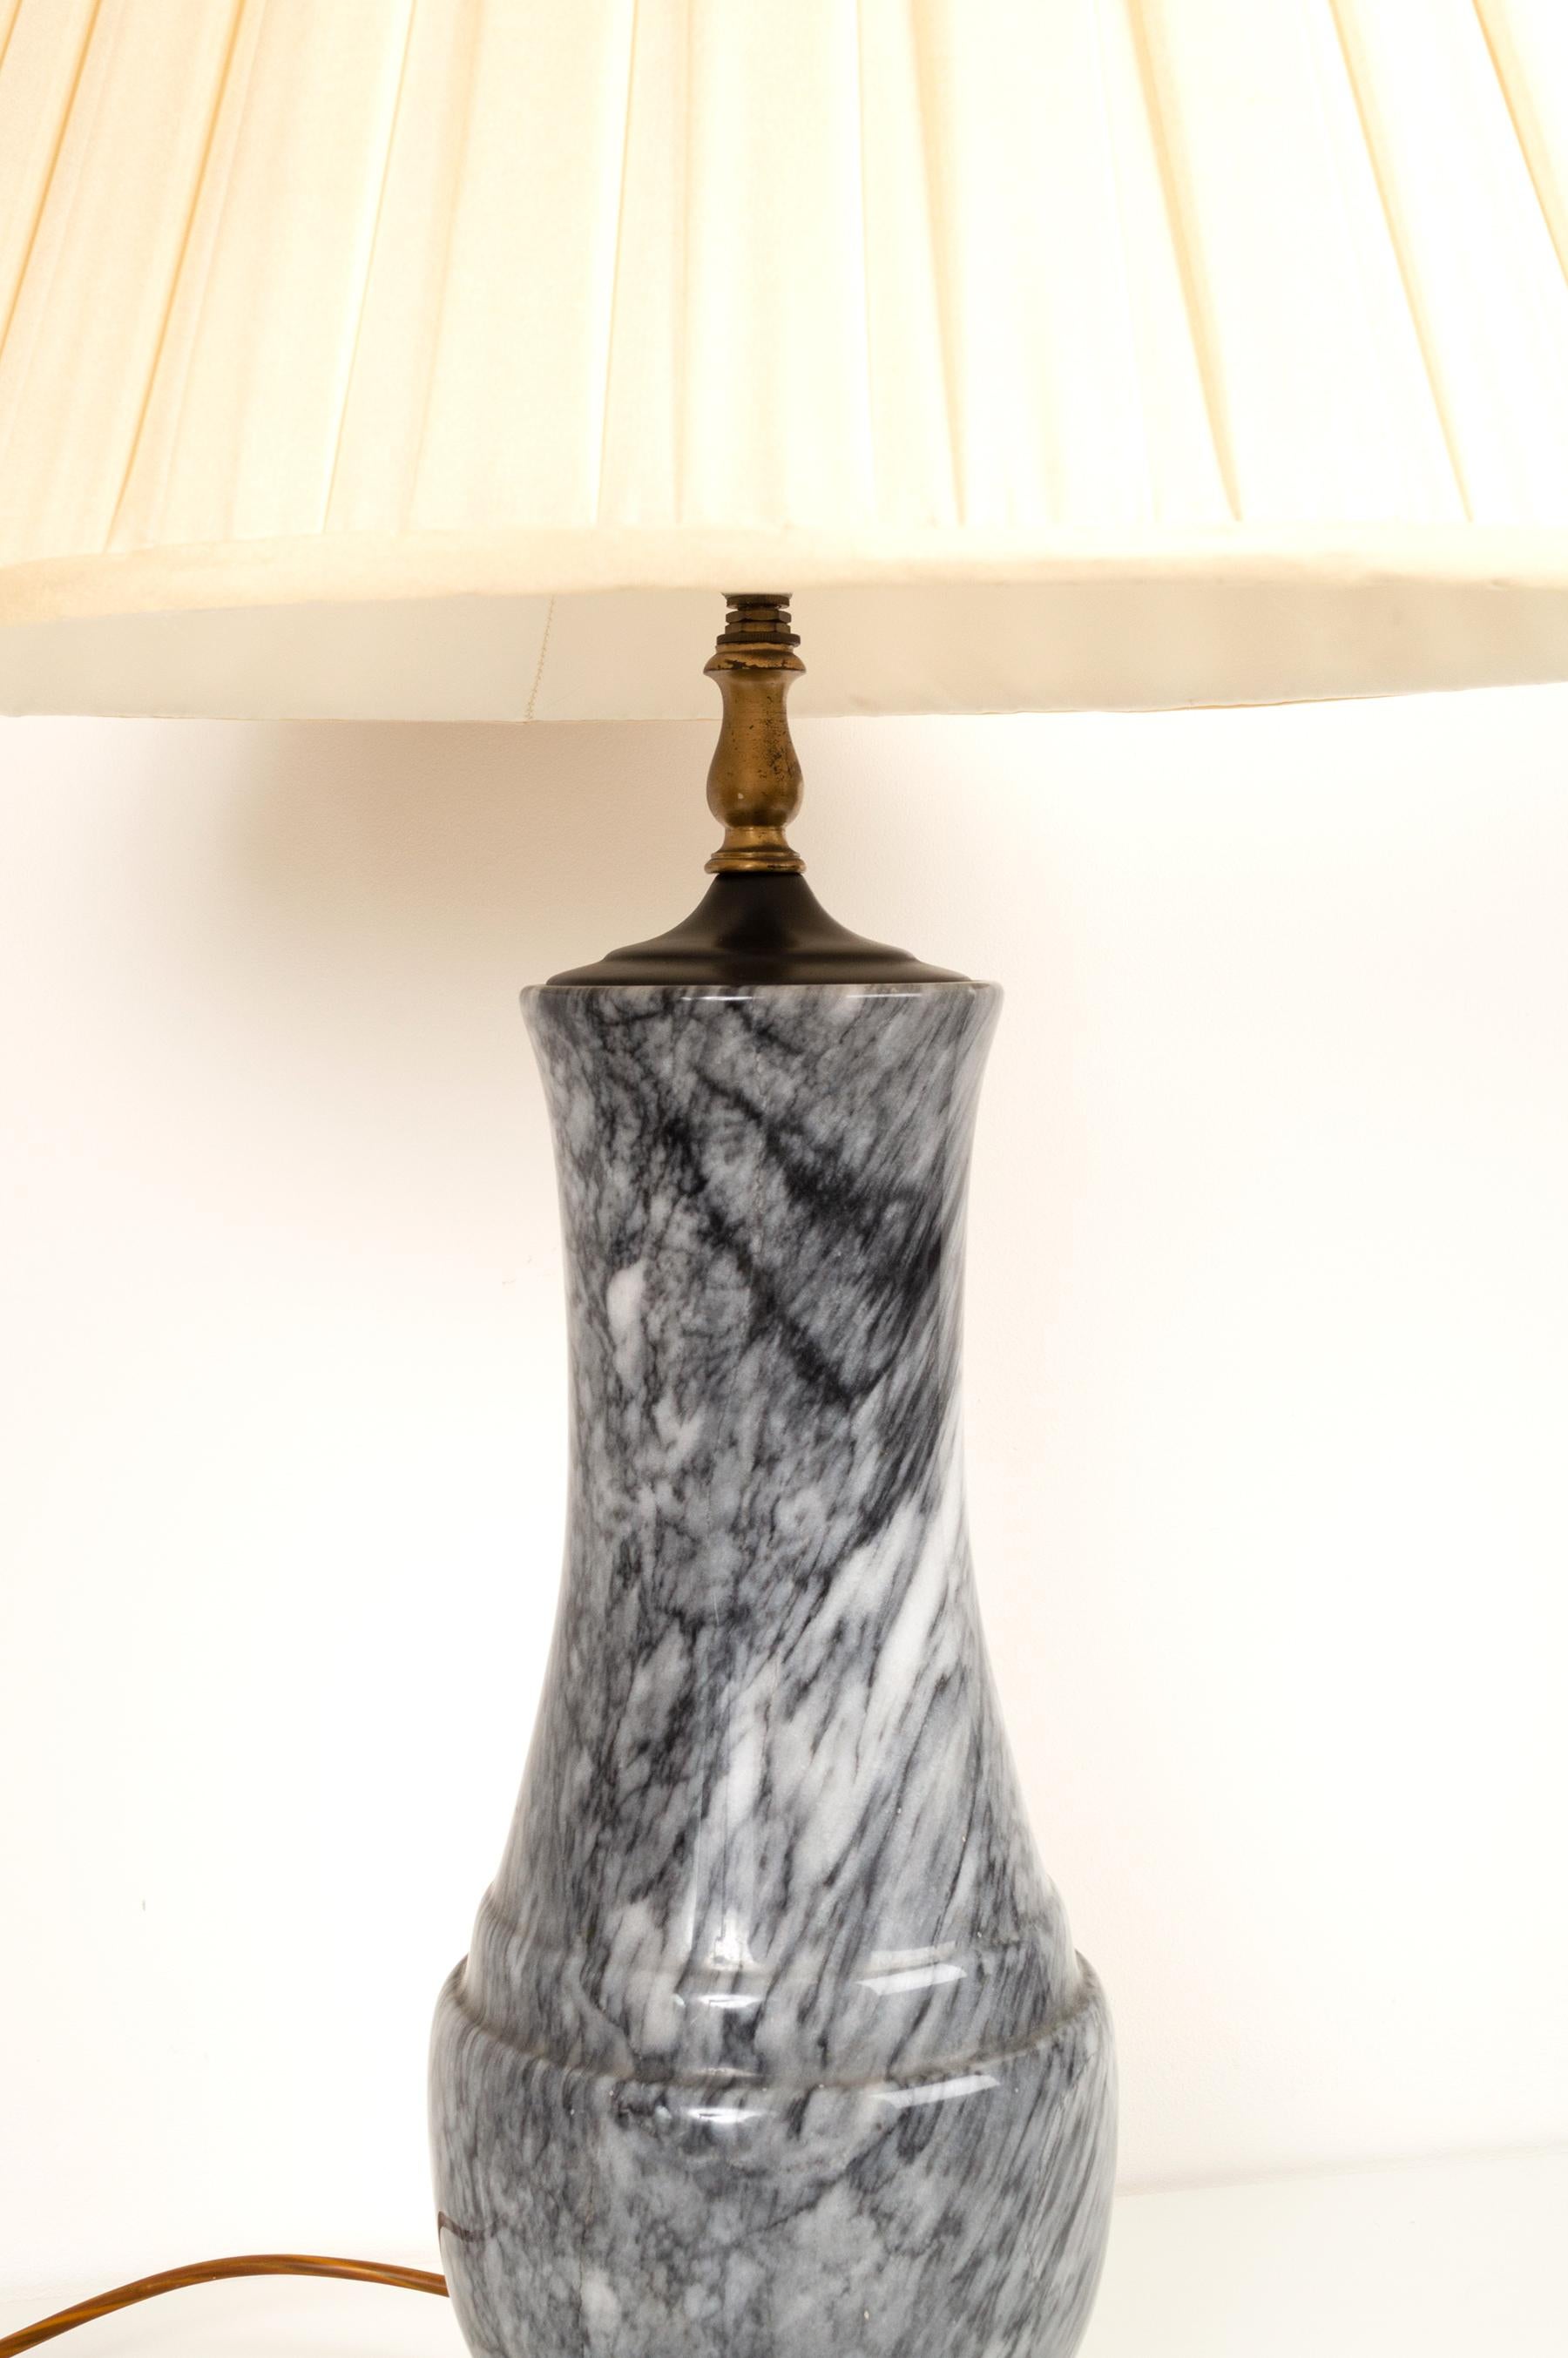 A classically shaped large table lamp, constructed from a single piece of solid marble.
Dating from C.1970.
Colour of marble: Black, white and grey

Presented in excellent condition commensurate of age.